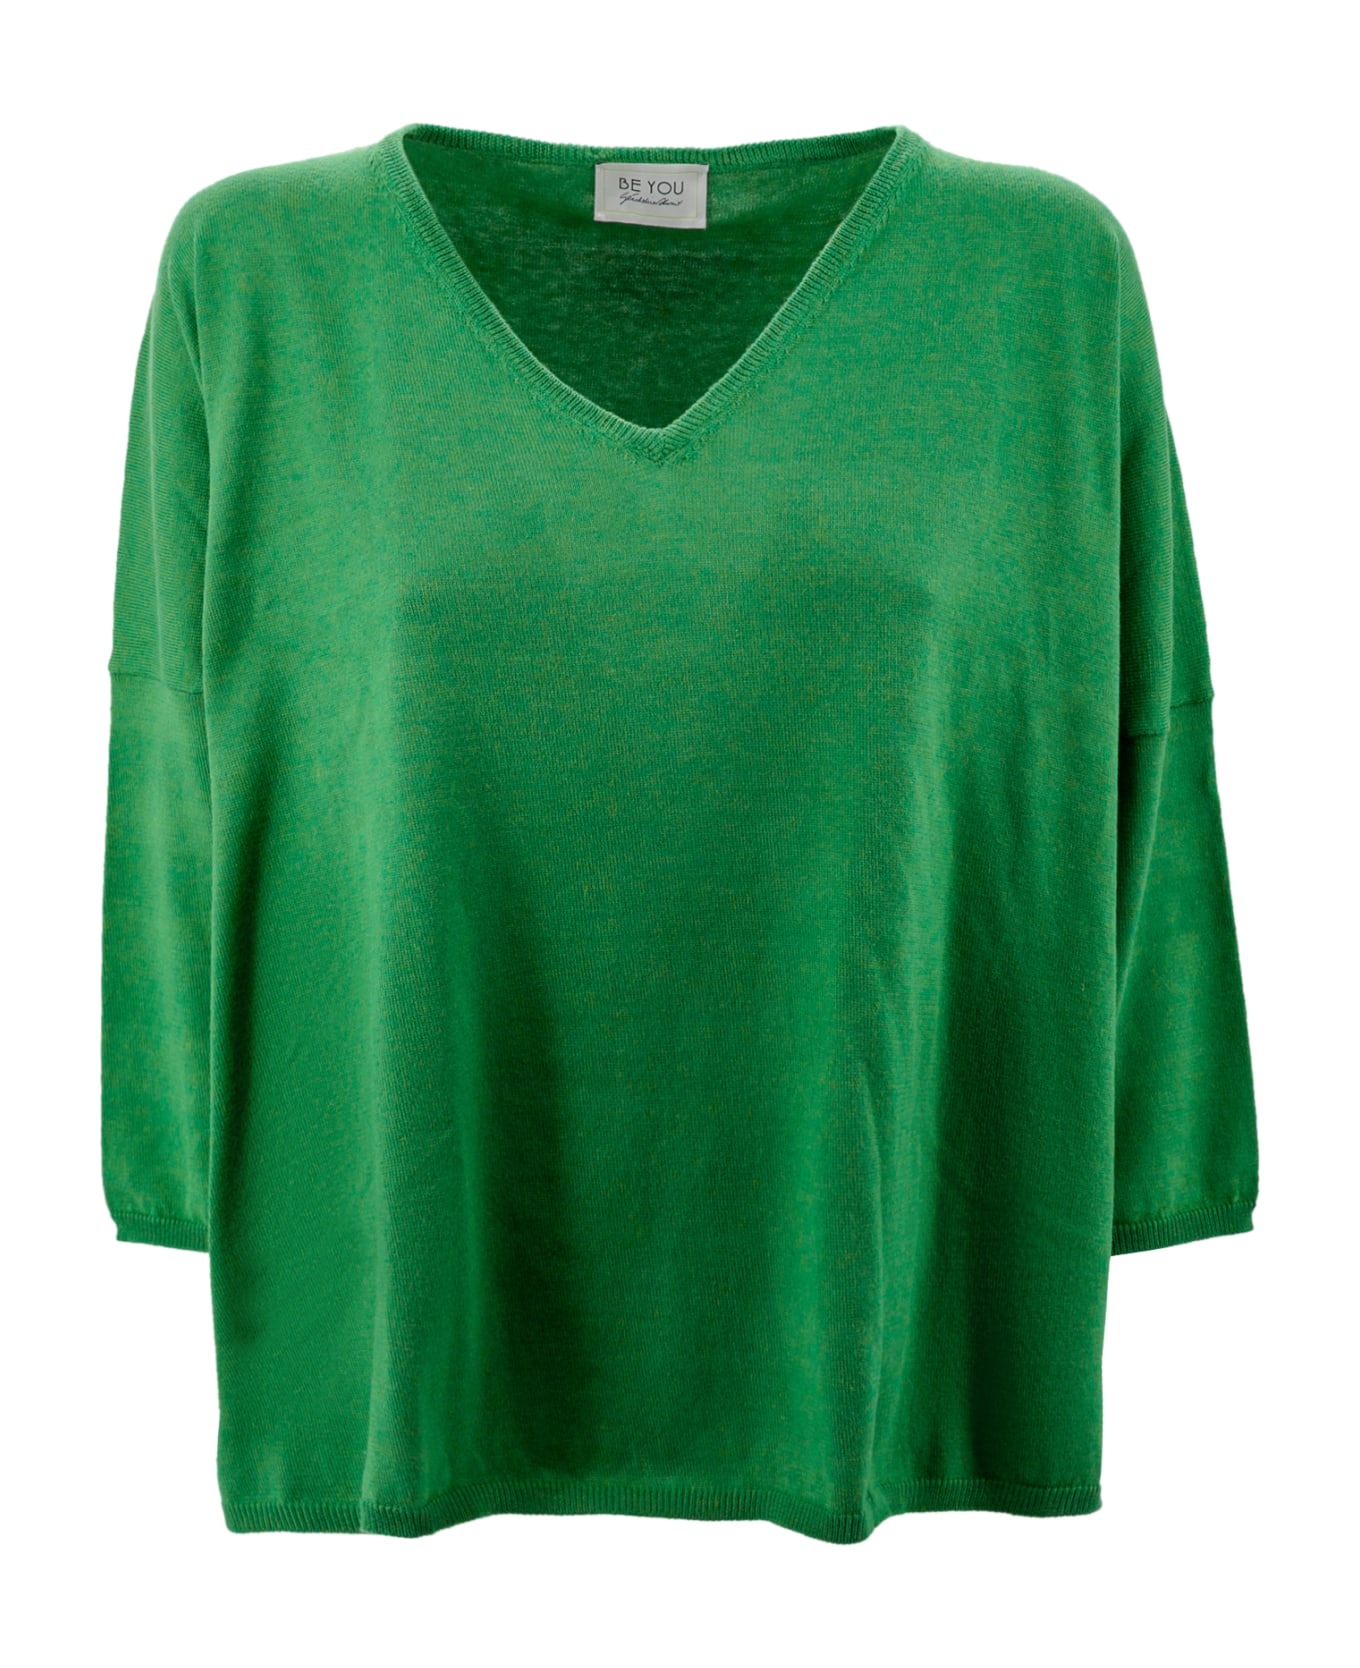 Be You V-neck Sweater - Green